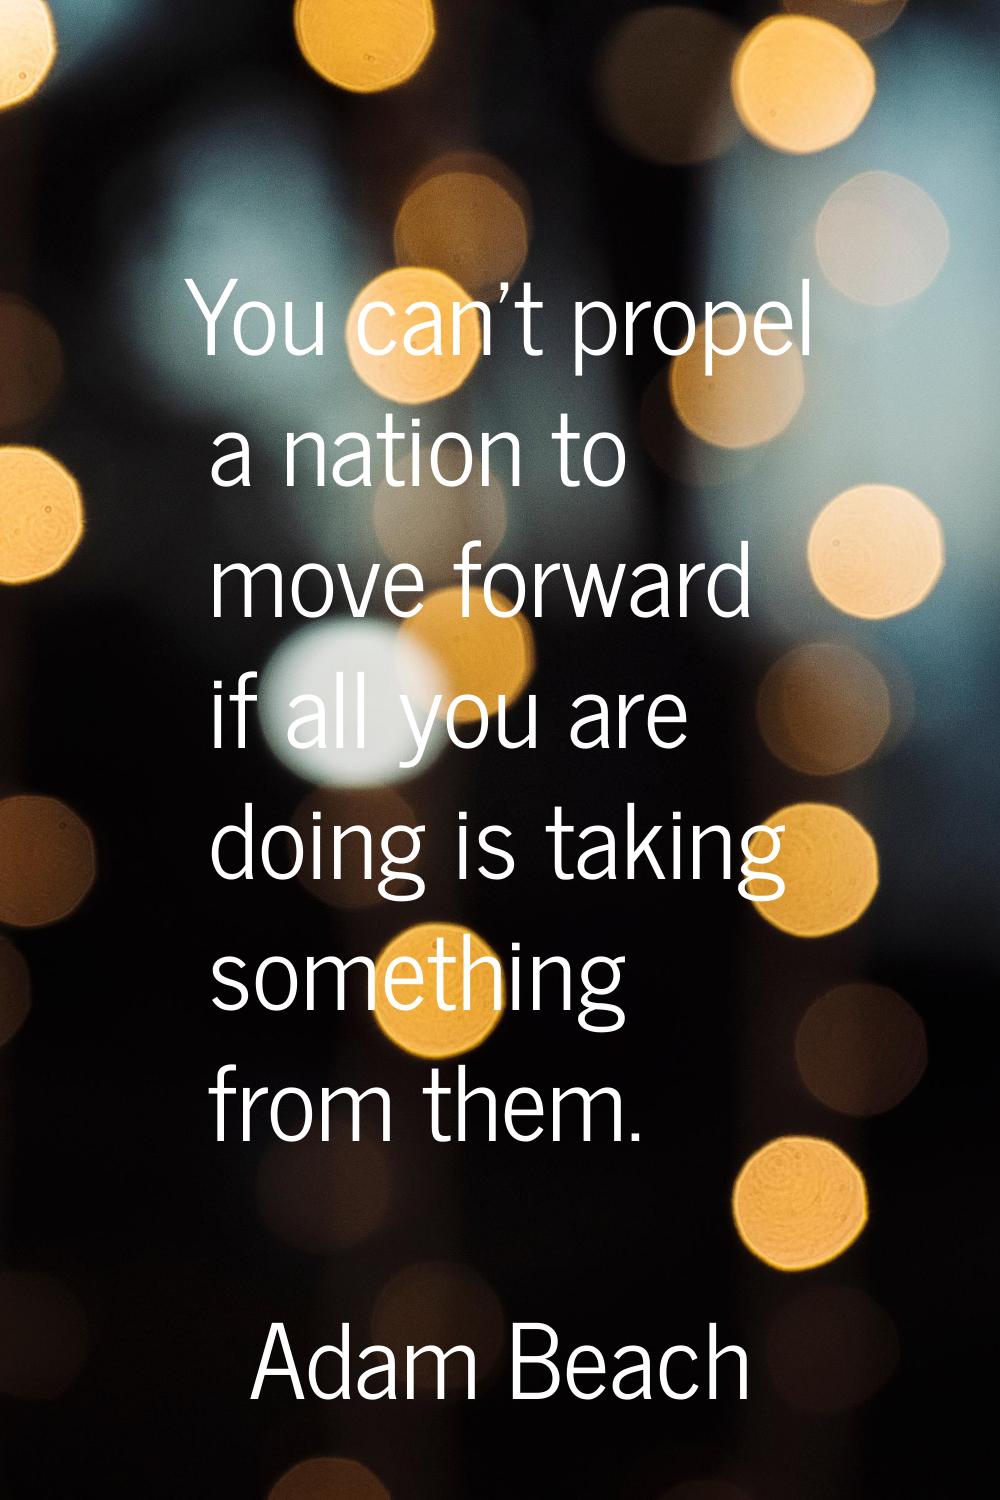 You can't propel a nation to move forward if all you are doing is taking something from them.